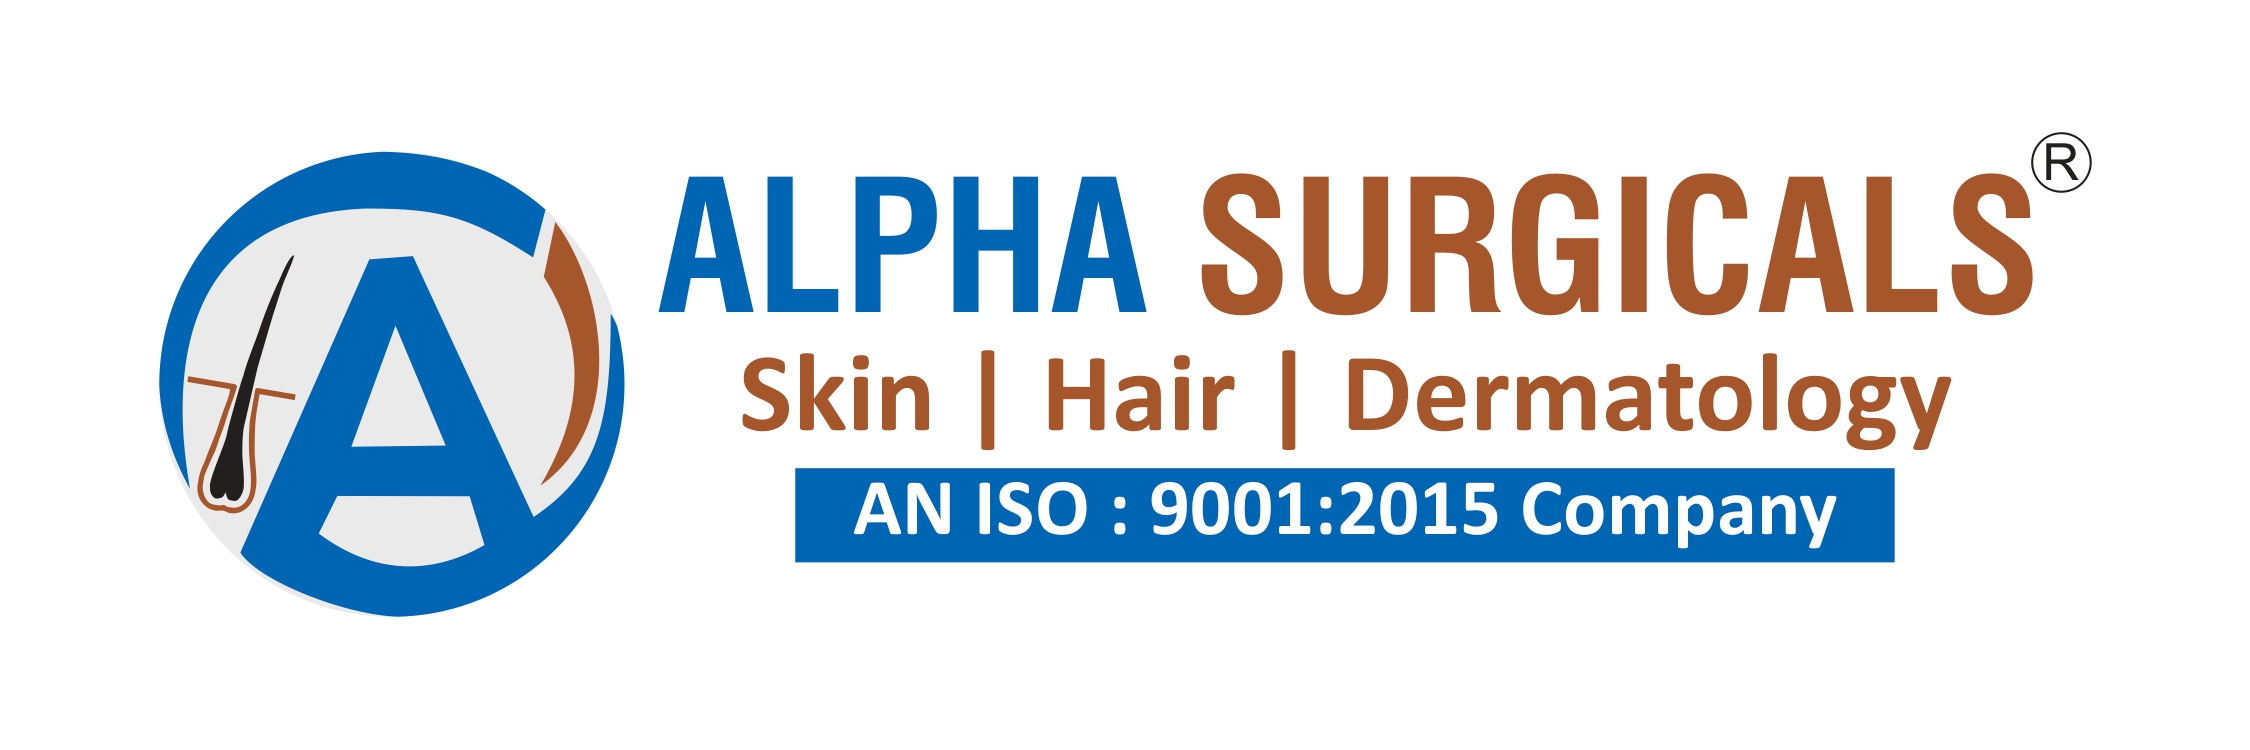 "Alpha Surgicals - High-Quality Medical Instruments and Supplies"